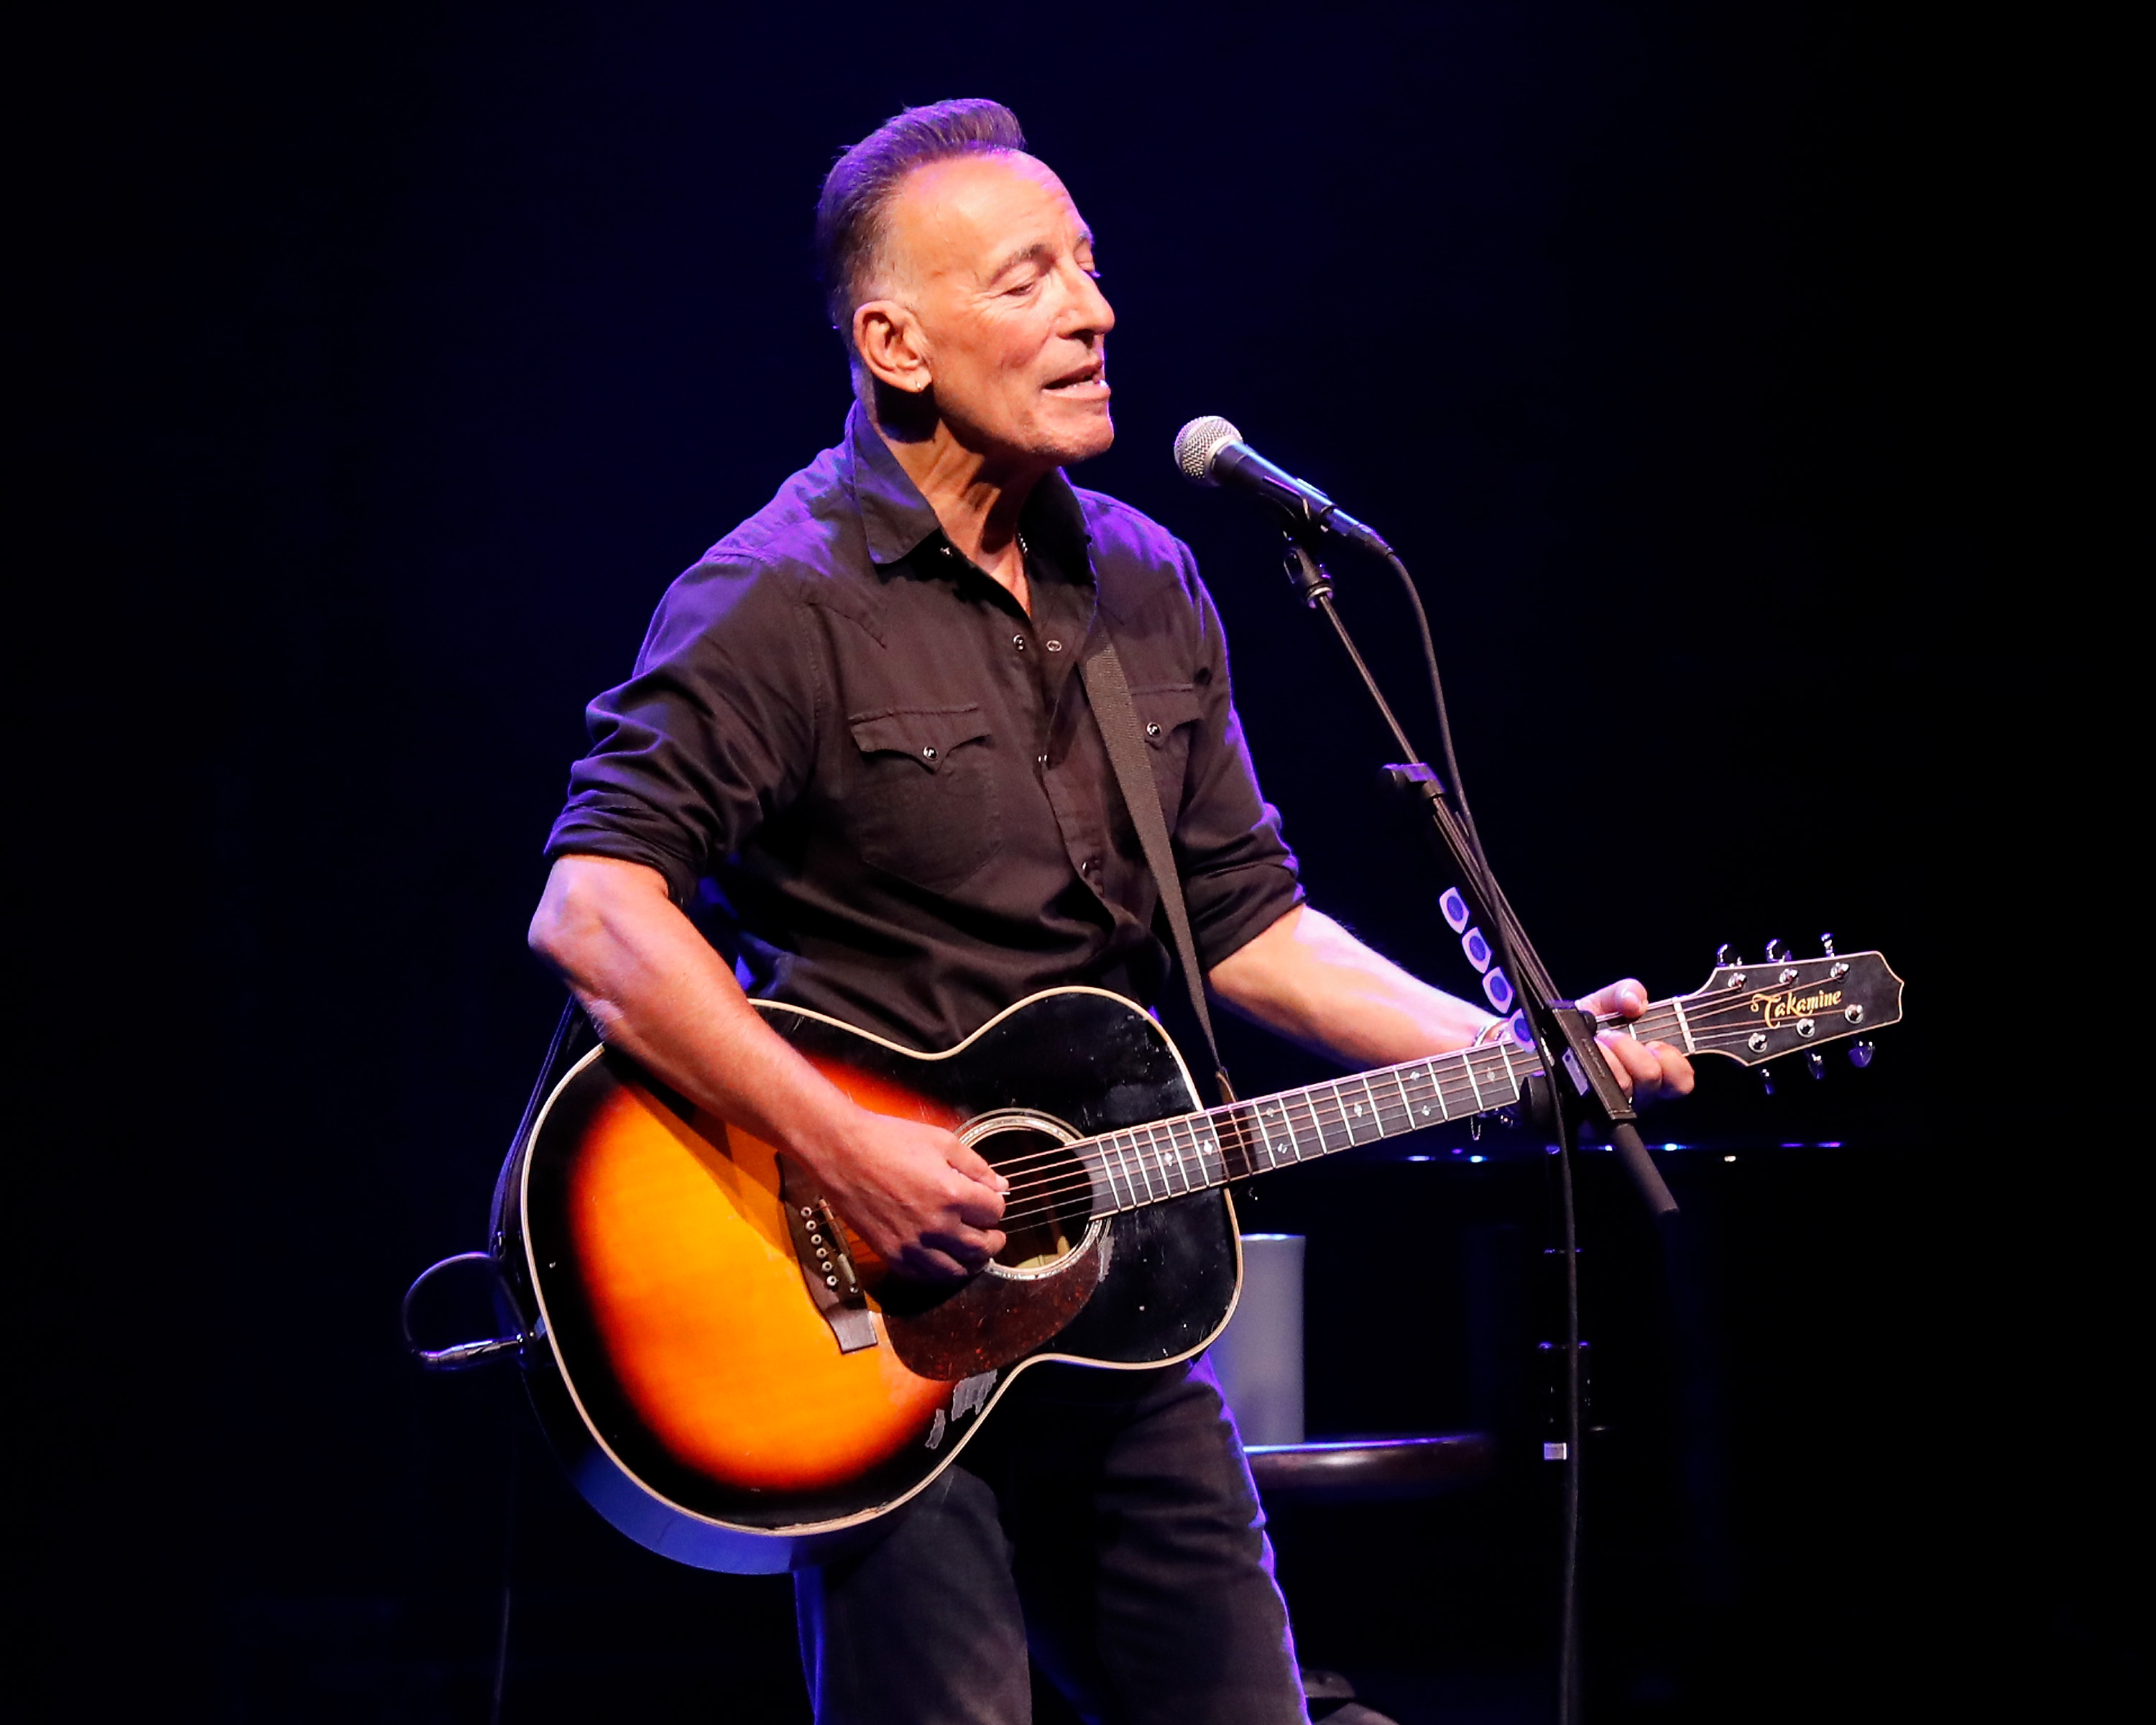 Bruce Springsteen performs during reopening night of "Springsteen on Broadway" for a full-capacity, vaccinated audience at St. James Theatre on June 26, 2021 in New York City. (Getty Images&mdash;2021 Taylor Hill)